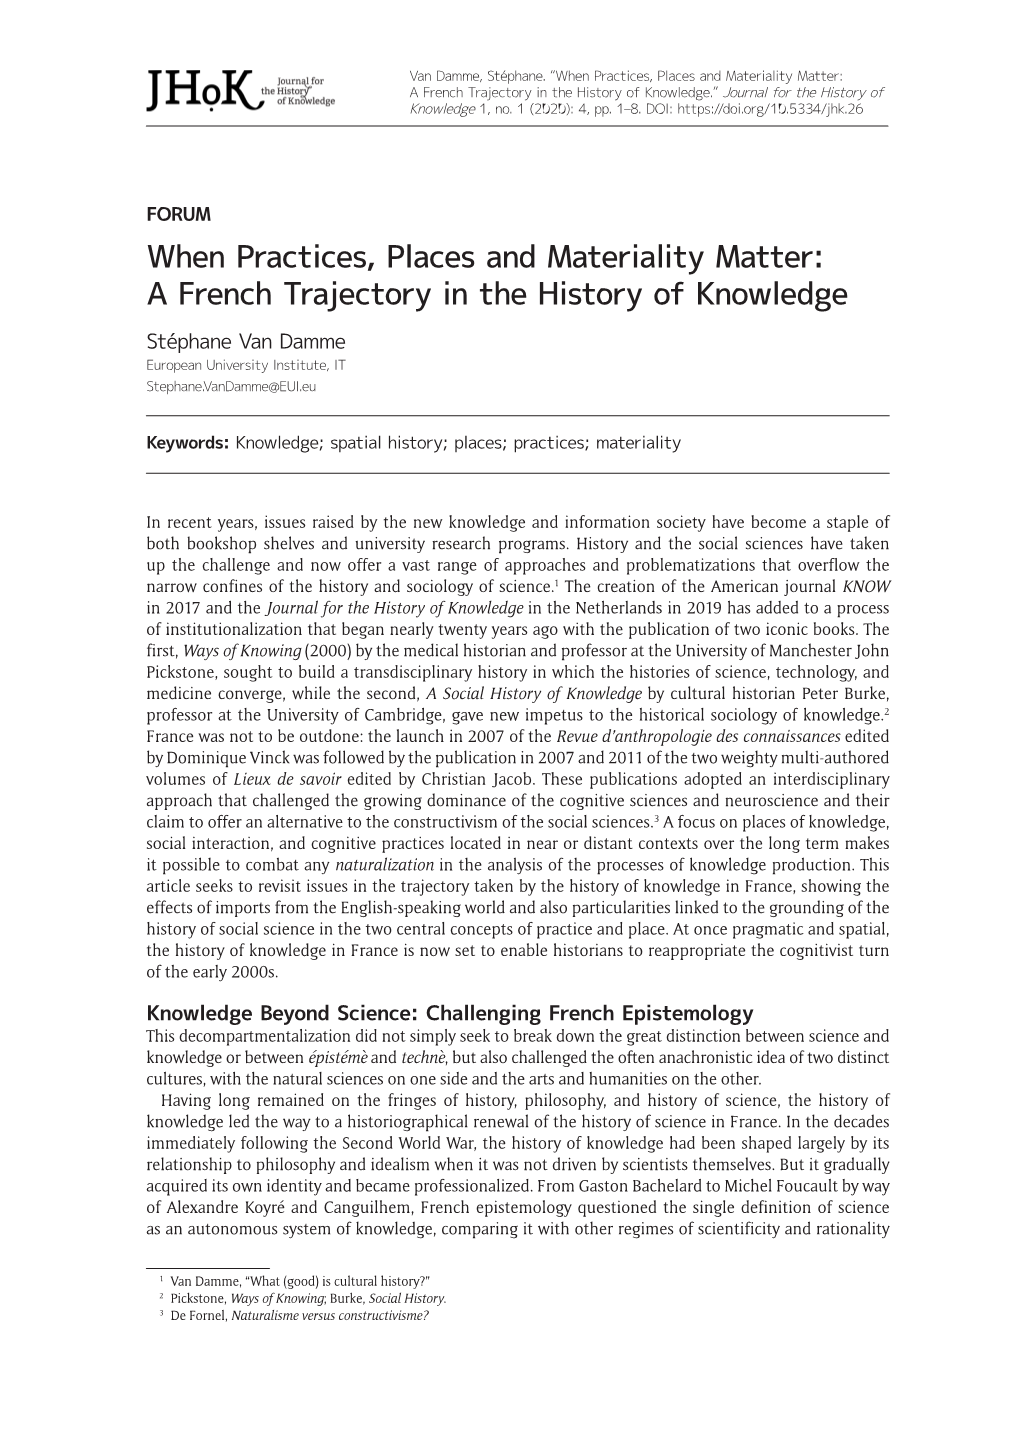 When Practices, Places and Materiality Matter: a French Trajectory in the History of Knowledge.” Journal for the History of Knowledge 1, No